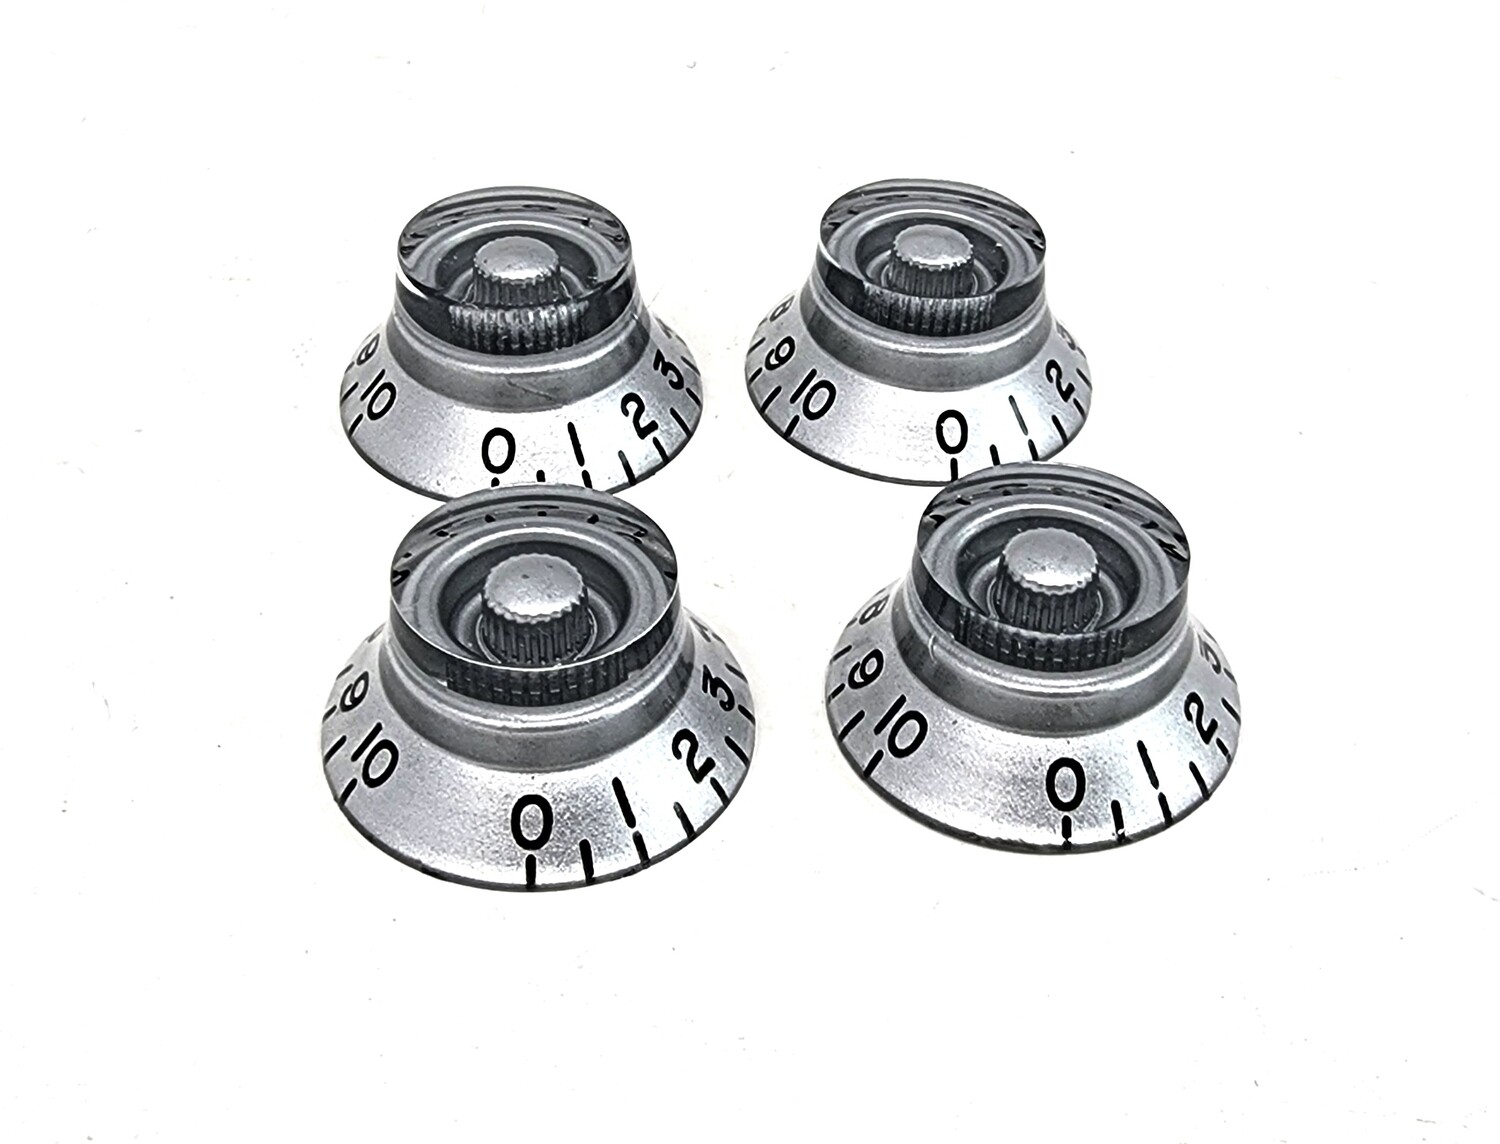 Brio Right Hand Bell Knobs Imperial ( US ) Size Set of 4 Silver